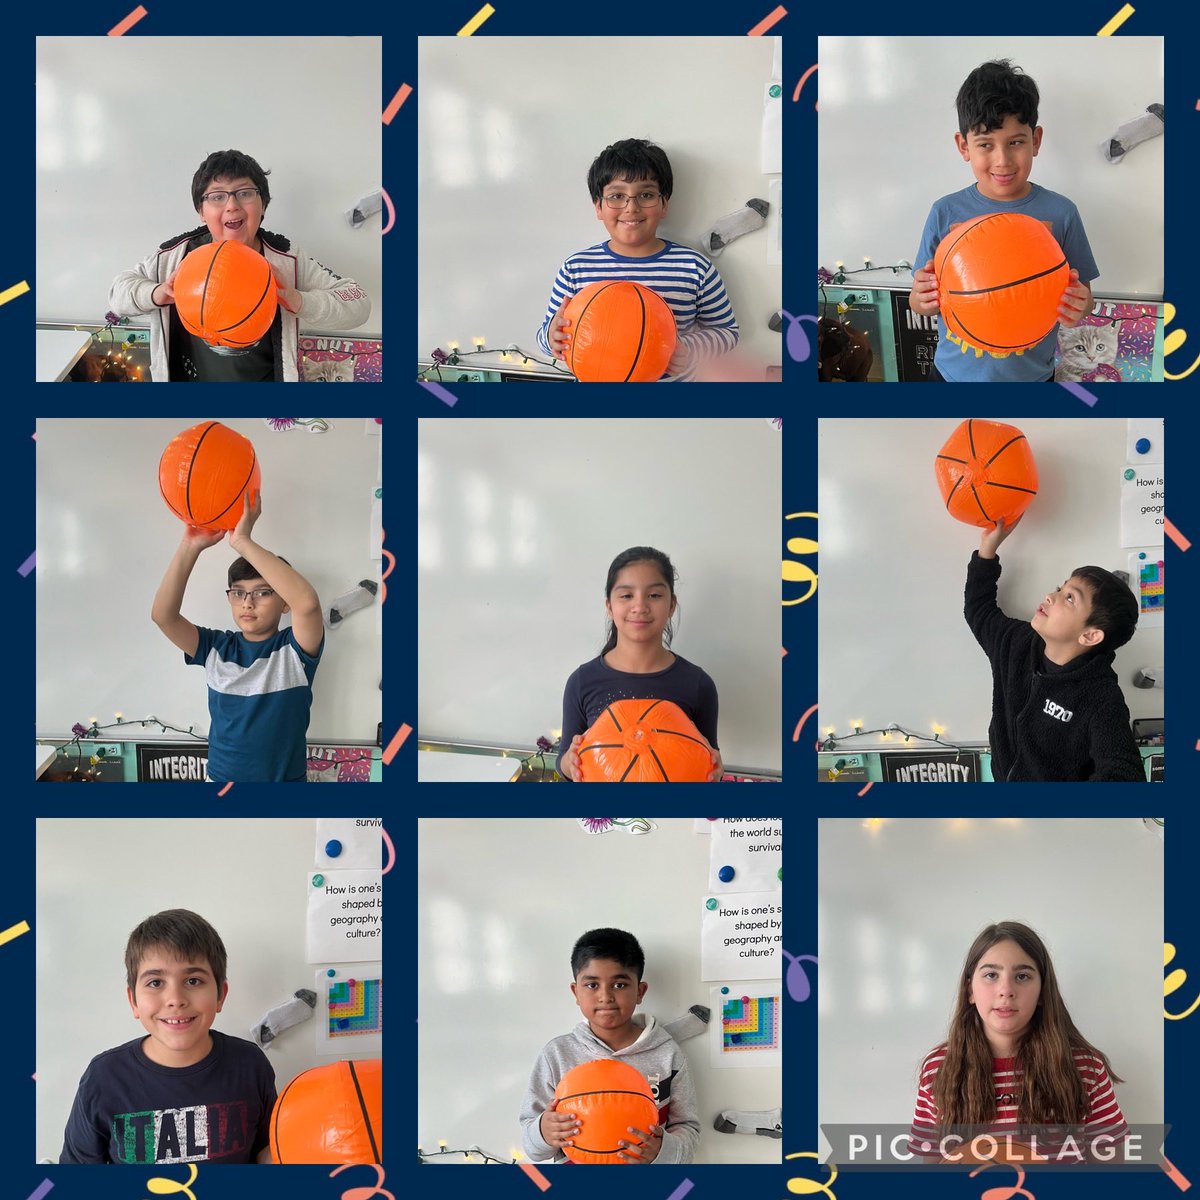 Team Weisberg 🏀 has moved on to the ⁦@LexiaLearning⁩ ⛹️‍♂️Finals⛹️‍♀️ in ⁦@Jackson_Ave⁩ #MarchMadness #MineolaProud #MineolaGrows ⁦@MineolaUFSD⁩ ⁦@ms_theofanis⁩